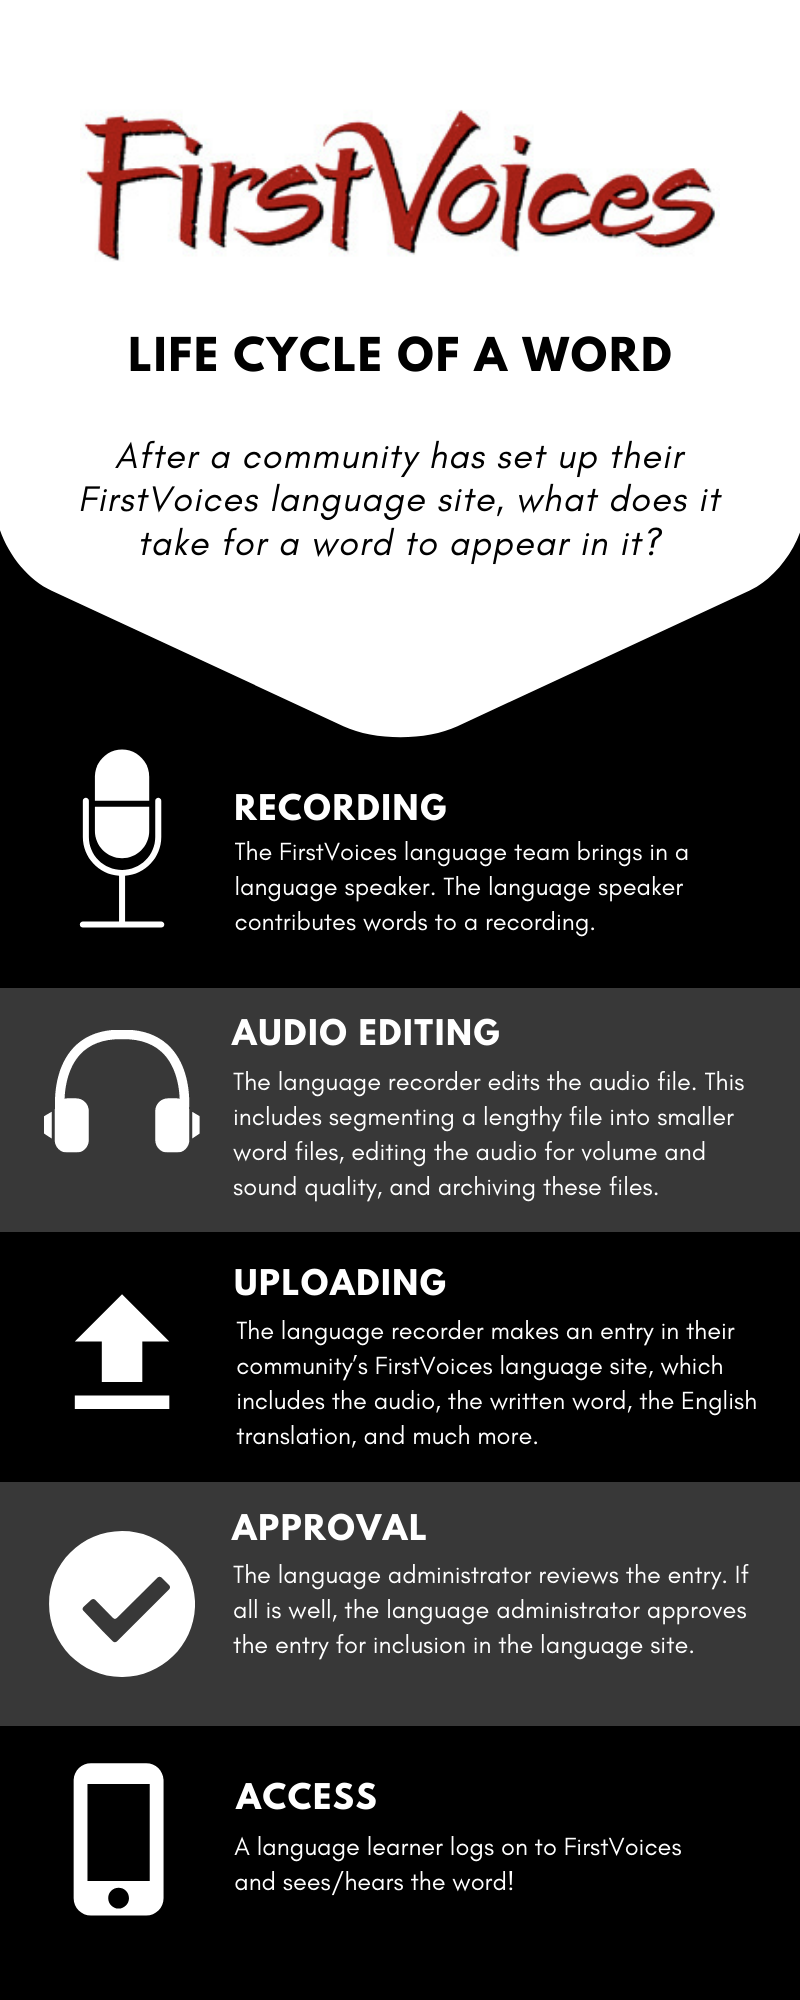 Lifecycle of a word graphic, from recording, to audio editing, to uploading, to approval, to access